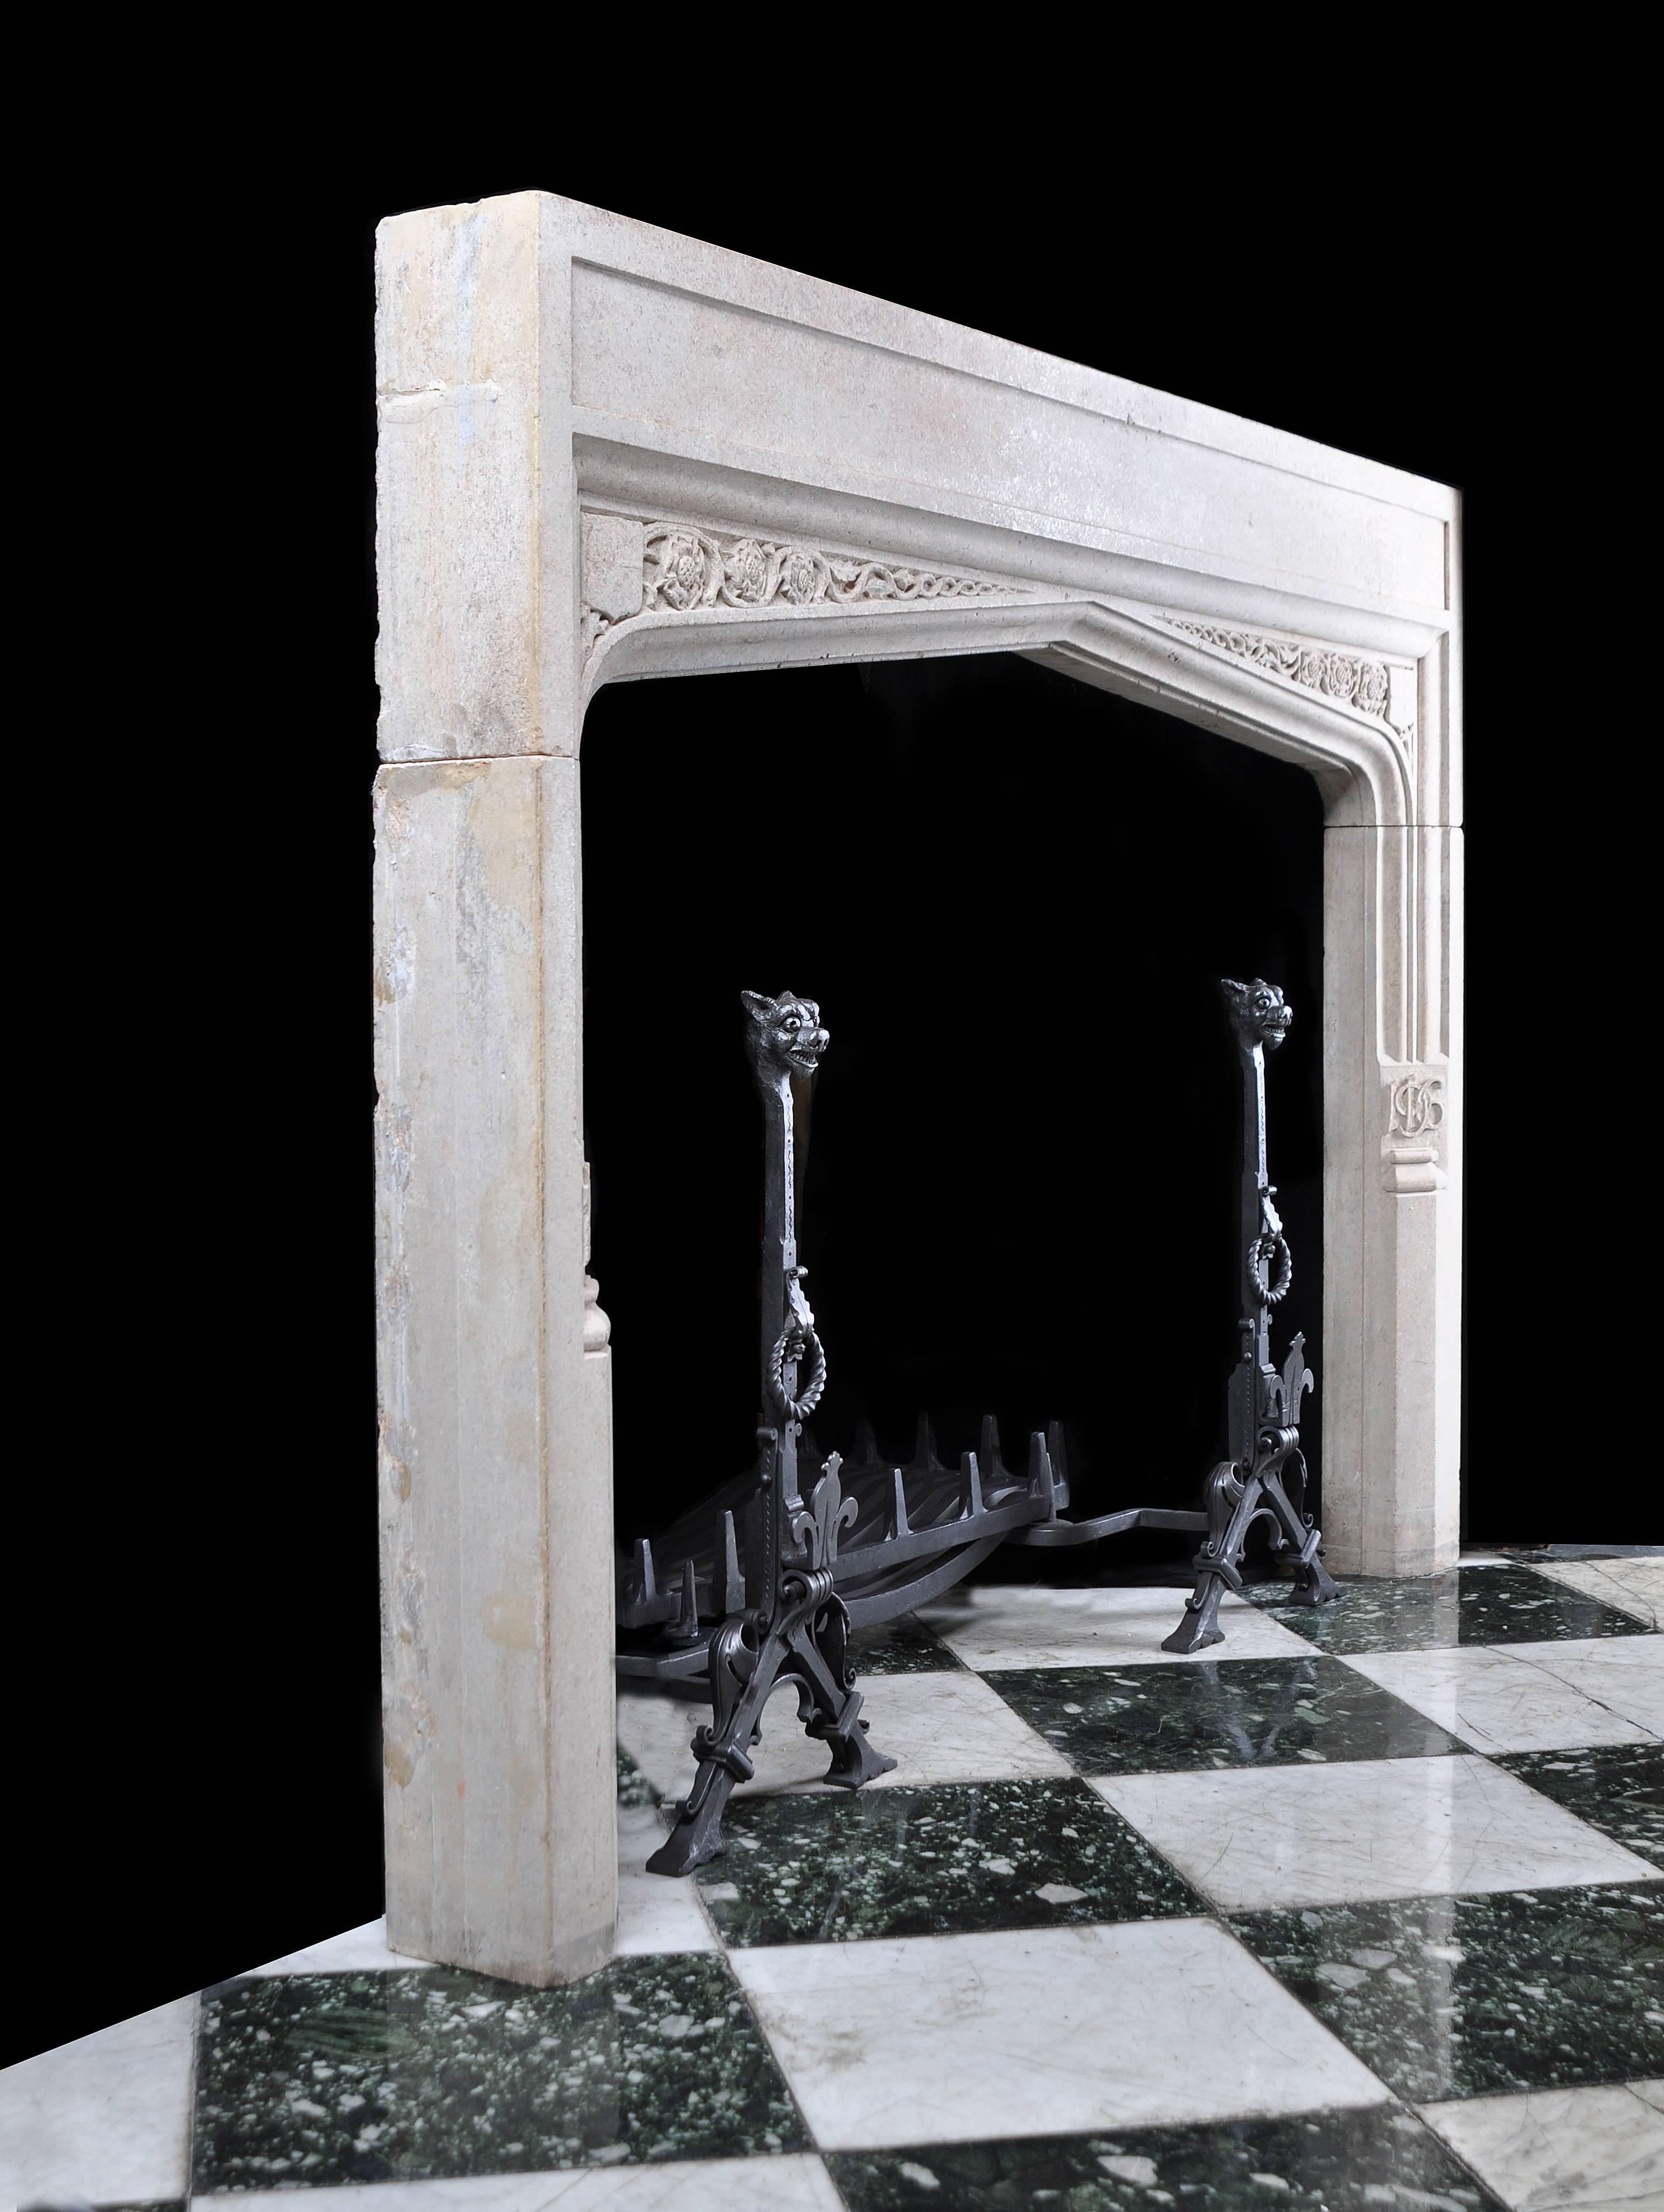 A substantial Tudor Revival style Derbyshire Fossil Limestone chimneypiece. The spandrels are carved with trailing rosette and shield motifs, the left jamb carved with the initials FPVC, the right jamb carved with the date 1916.